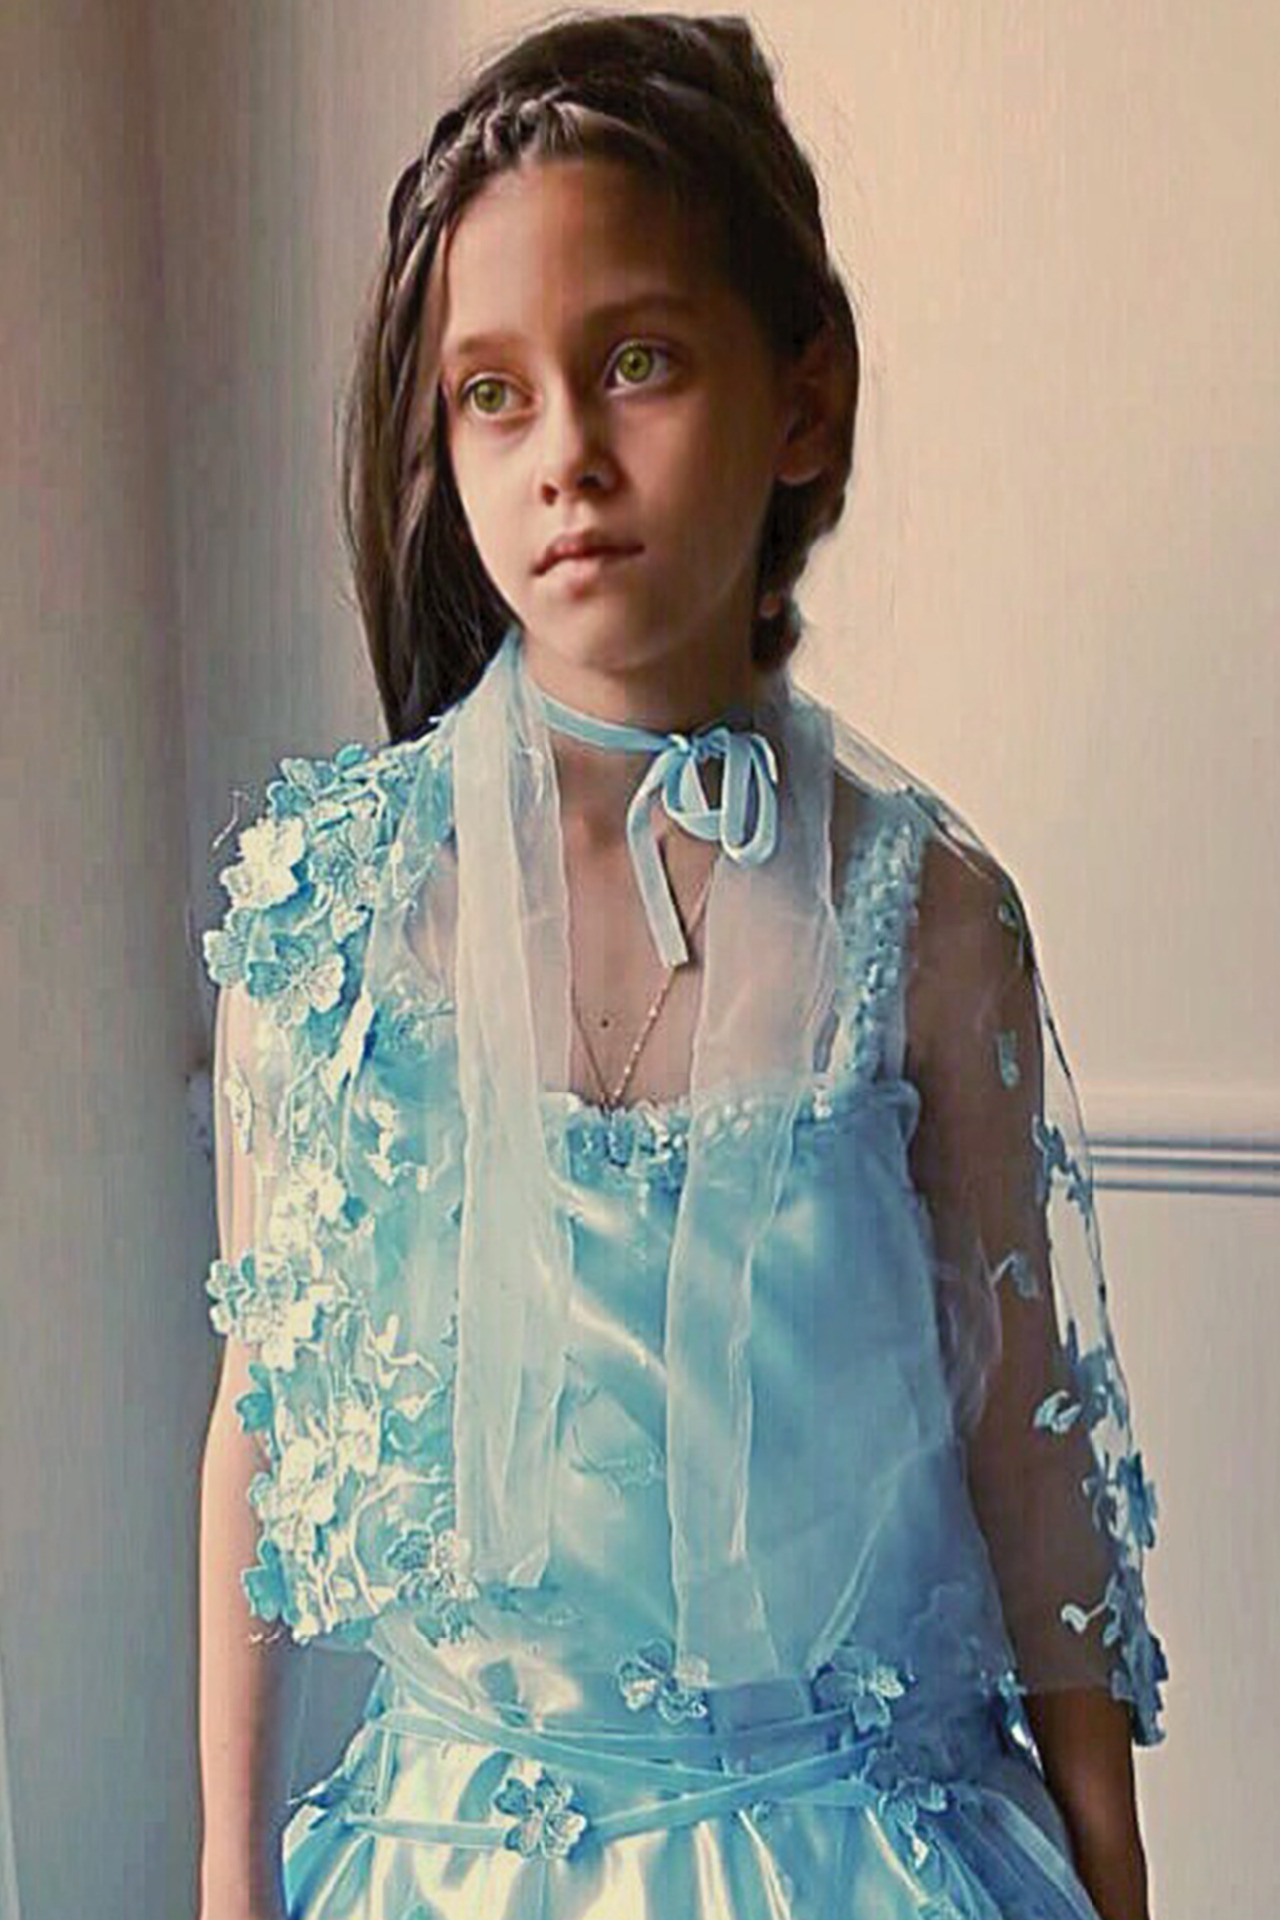 Blue Hydrangea Couture Dress by Miashan - Beautiful hand crafted high fashion for girls